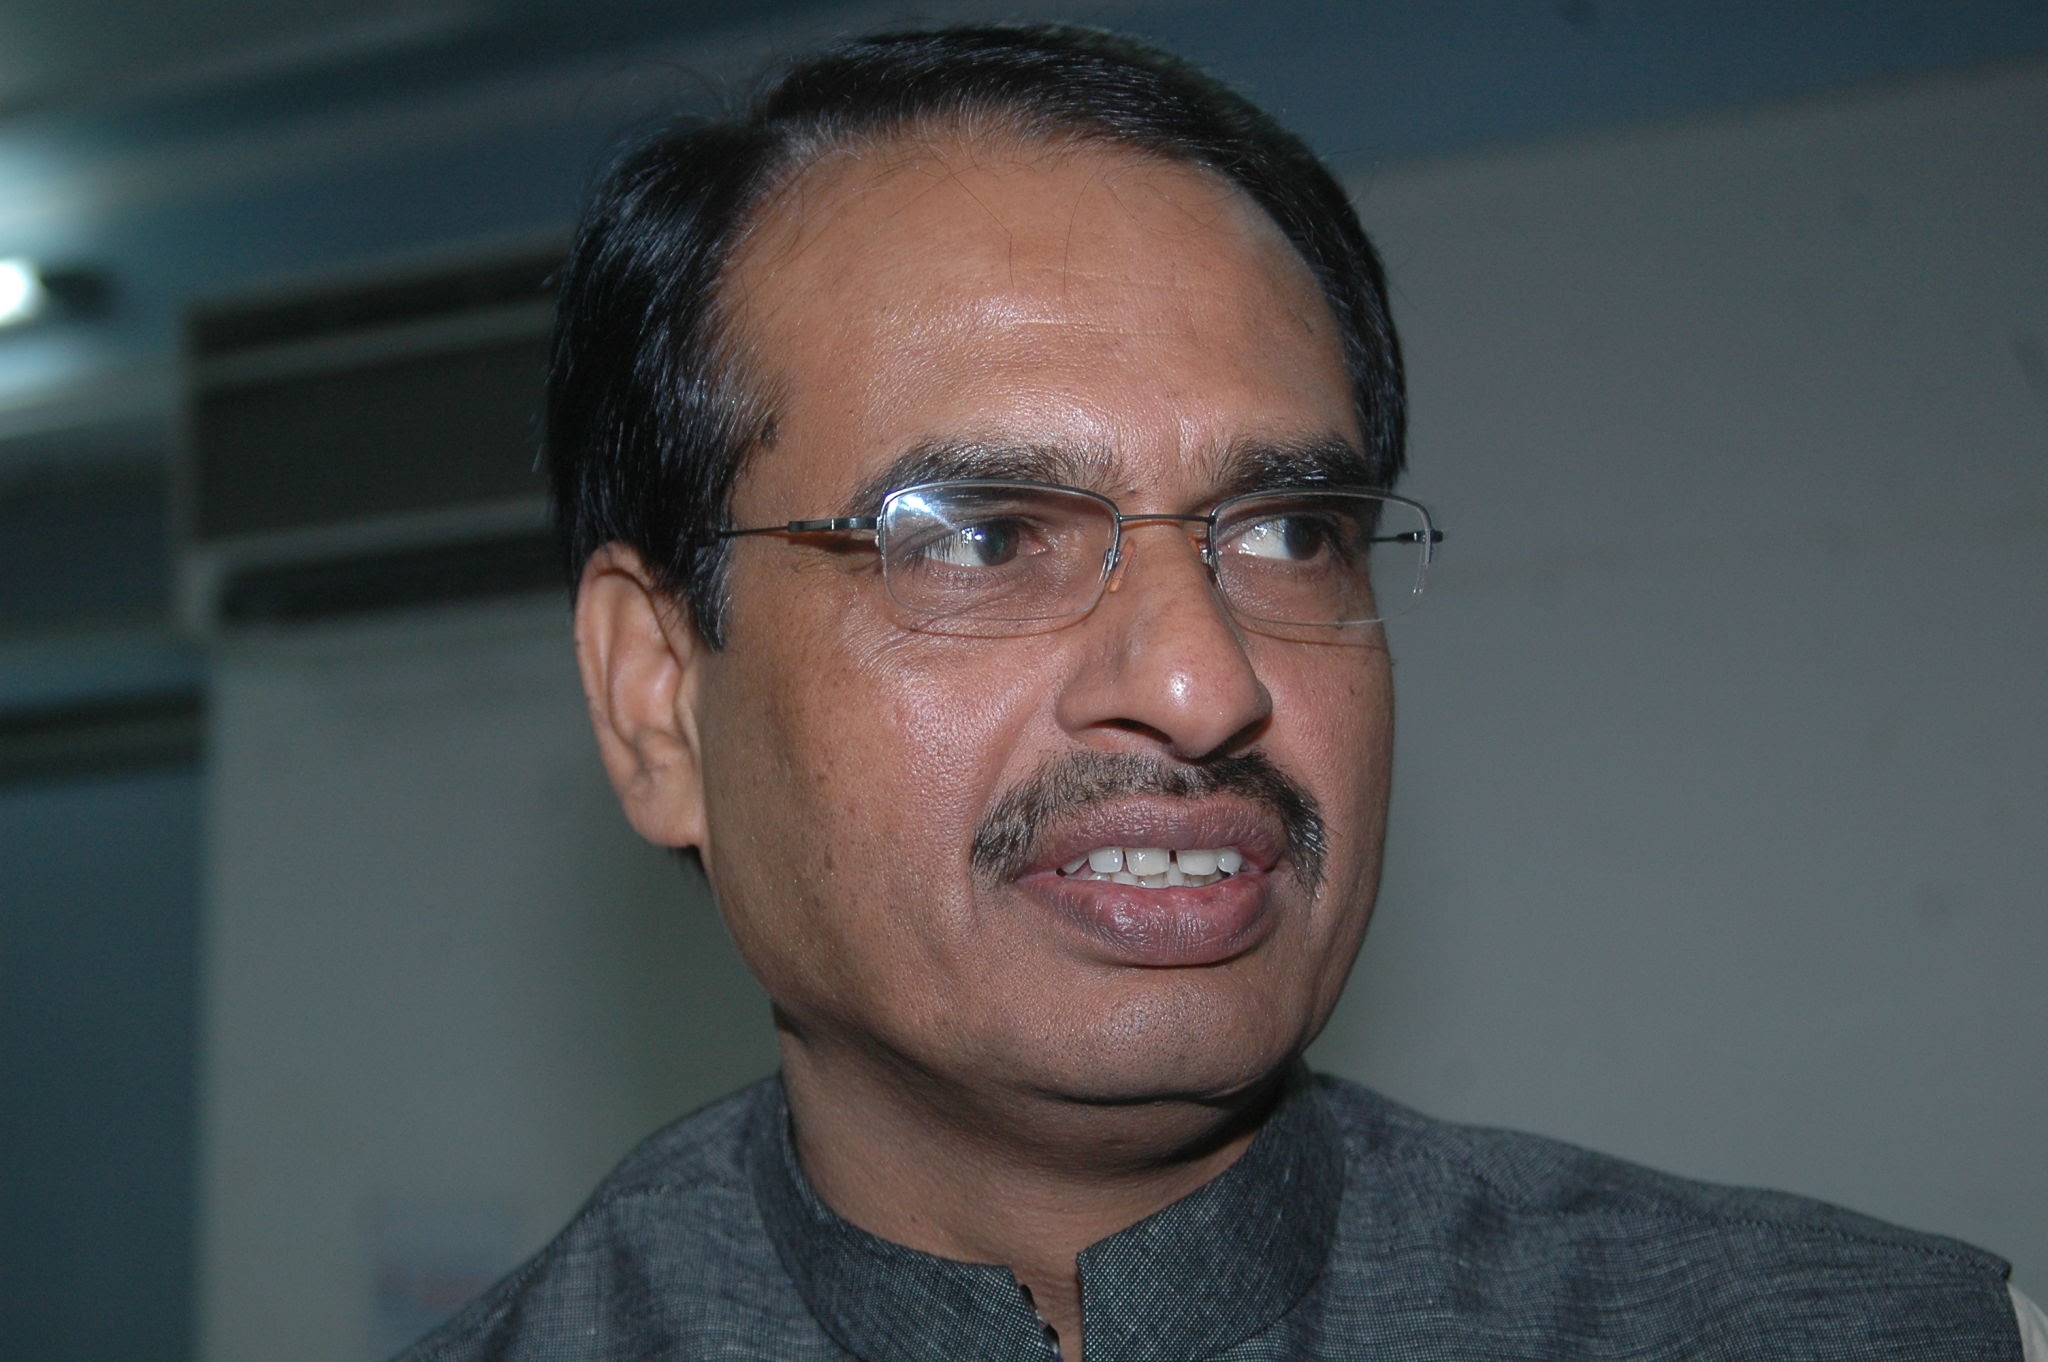 Shivraj Singh Chouhan, a politician and member of the Bharatiya Janata Party. He is the current Chief Minister of Madhya Pradesh, serving a fourth term. (Photo by Sondeep Shankar/Getty Images)